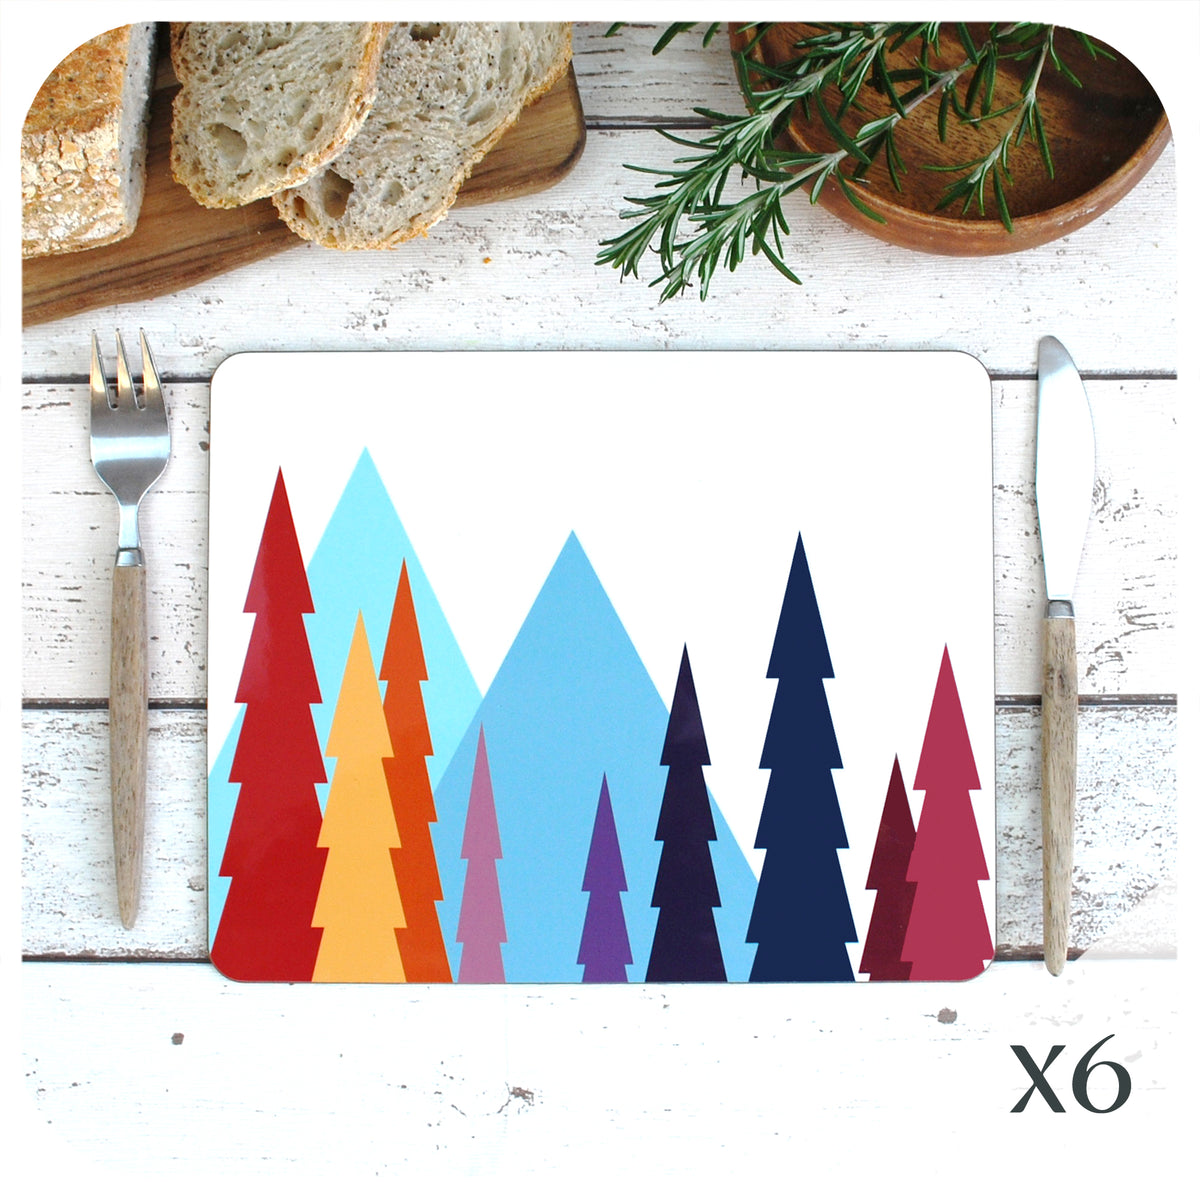 Nordic Trees Placemats, set of 6 | The Inkabilly Emporium